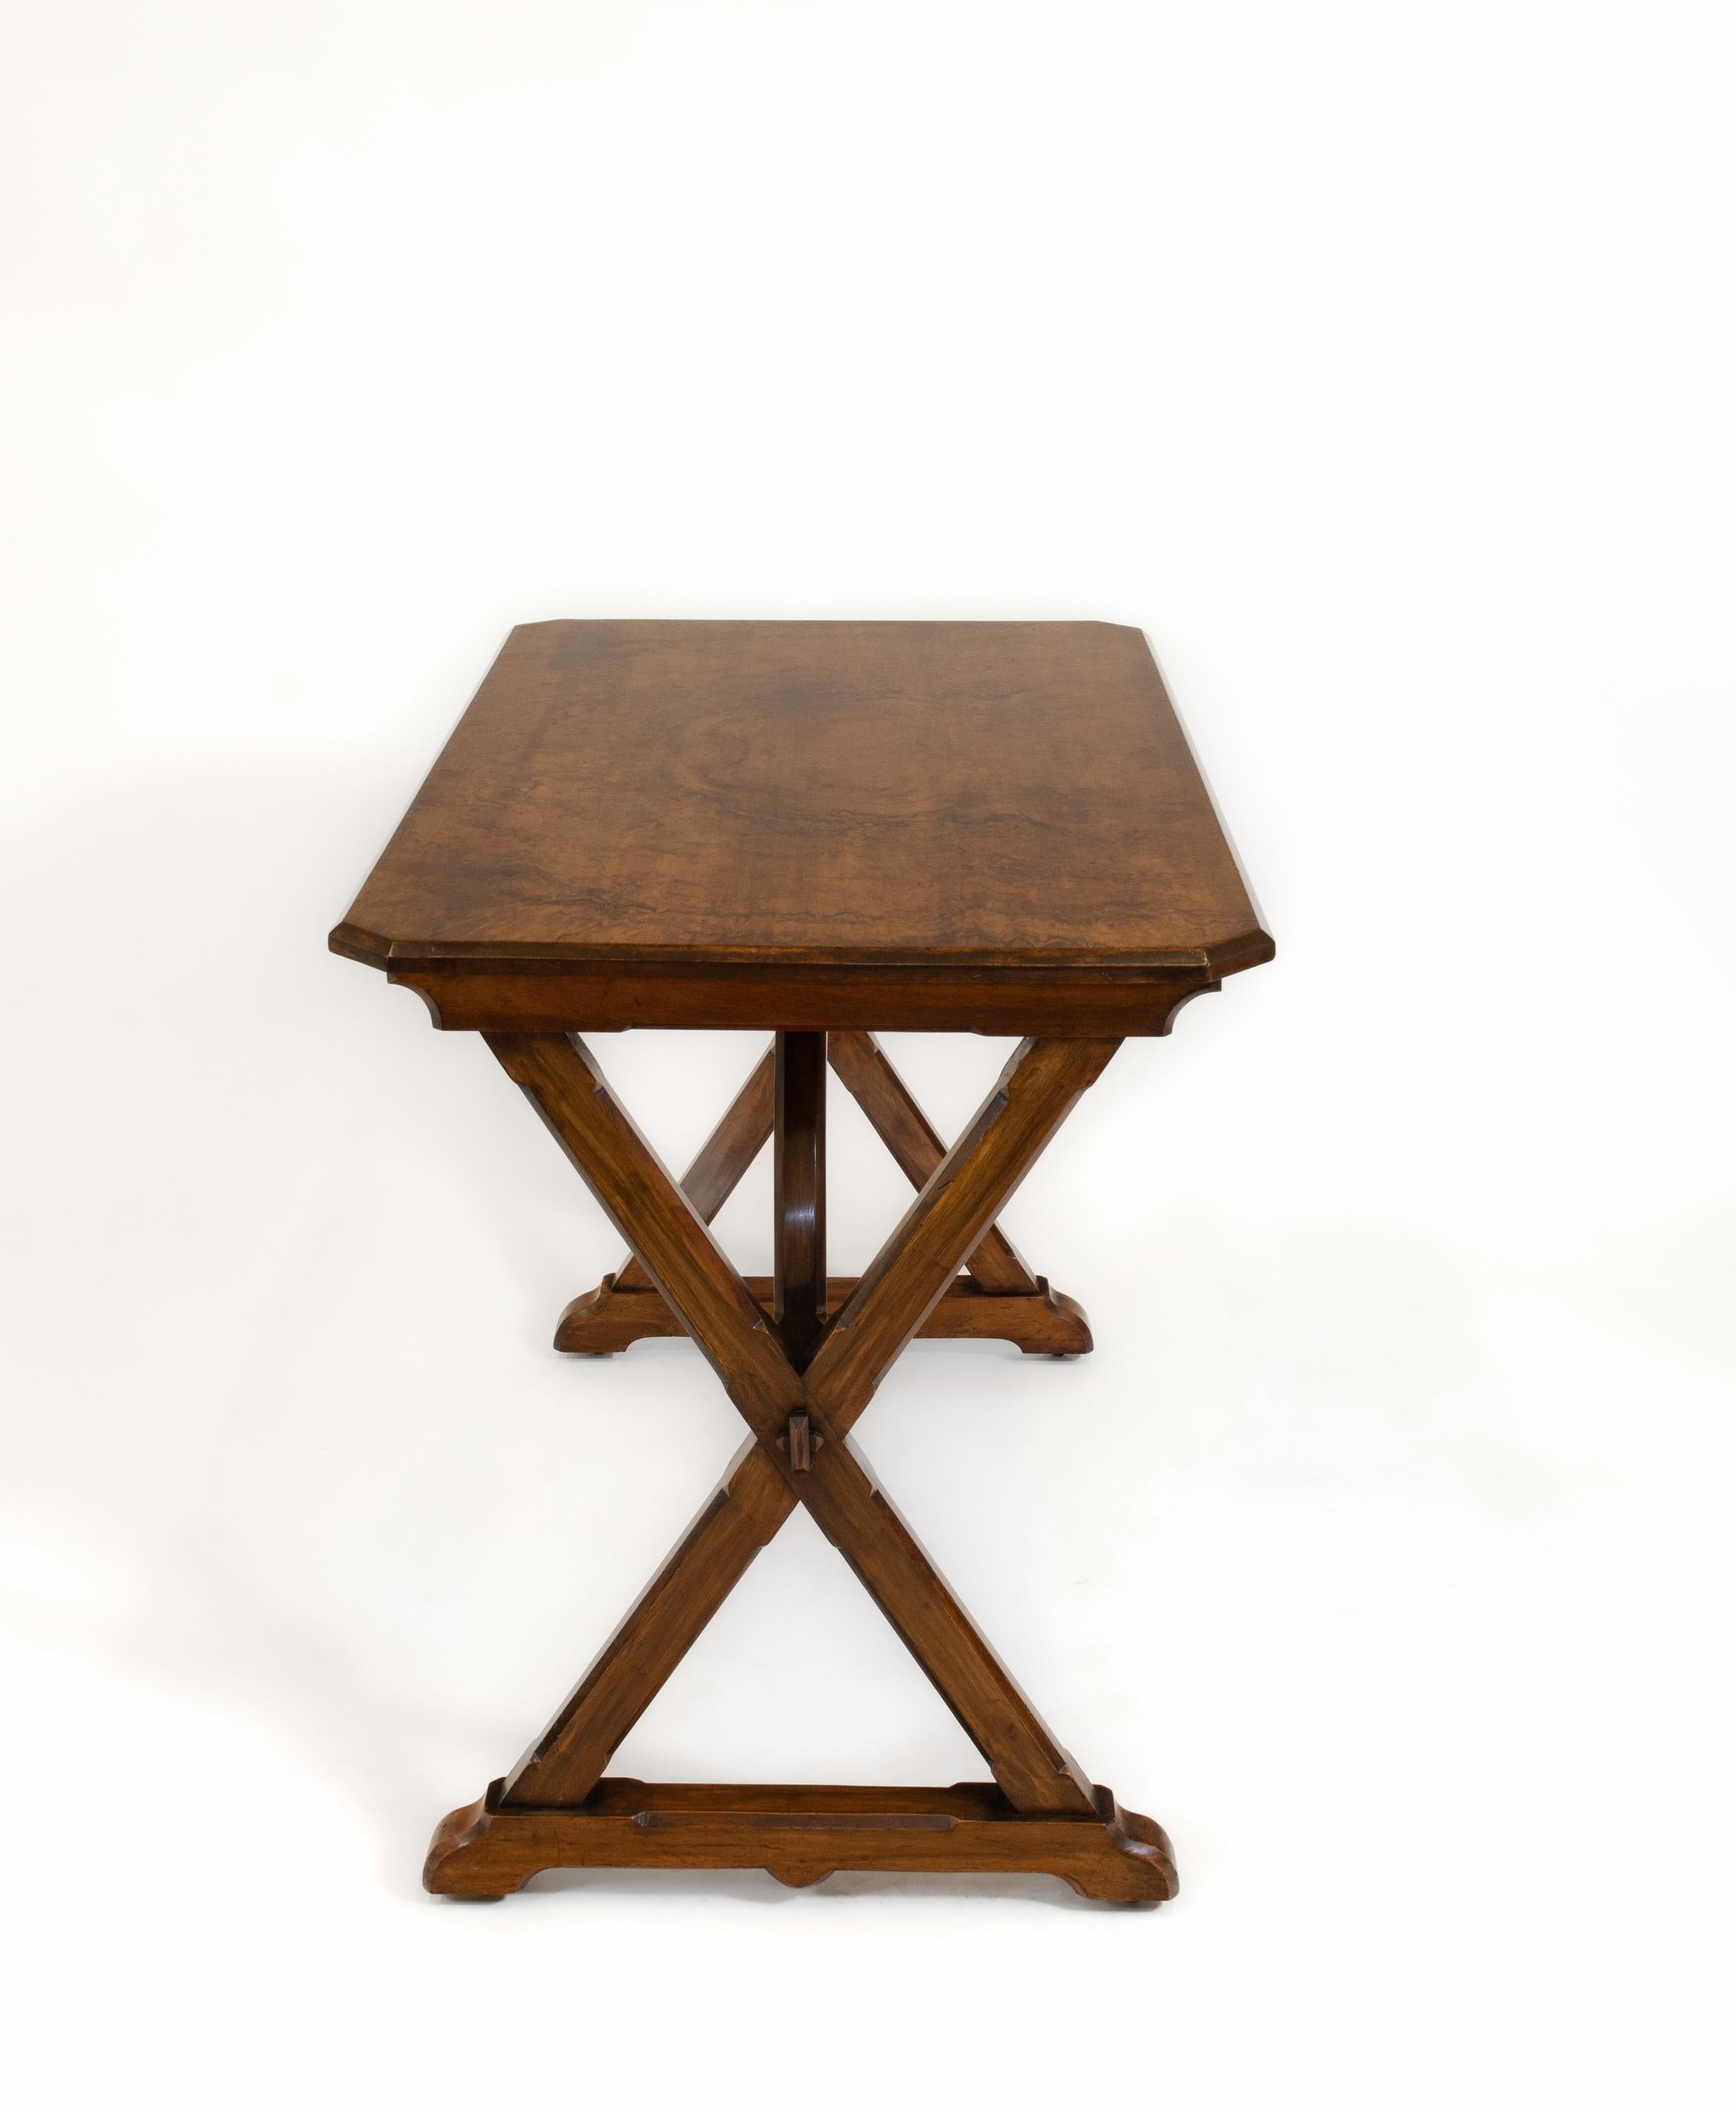 English 19th Century Gothic Revival Walnut Writing Side Table A W Pugin Manner For Sale